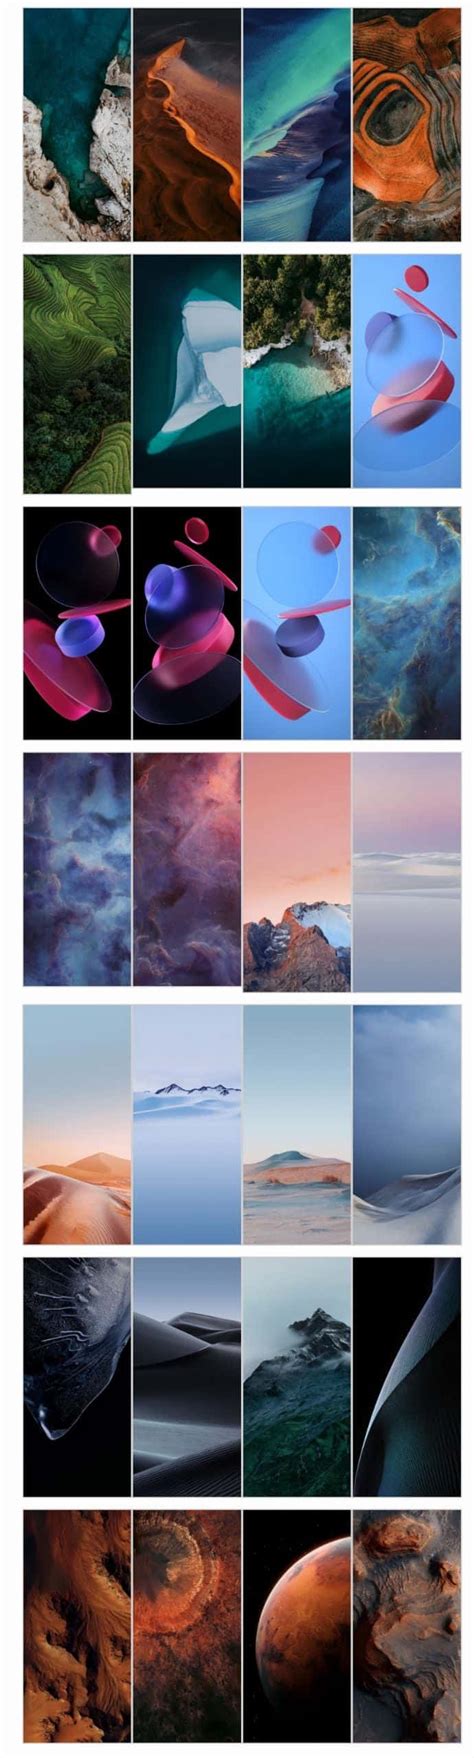 Miui 12 Download The New Wallpapers In Full Resolution